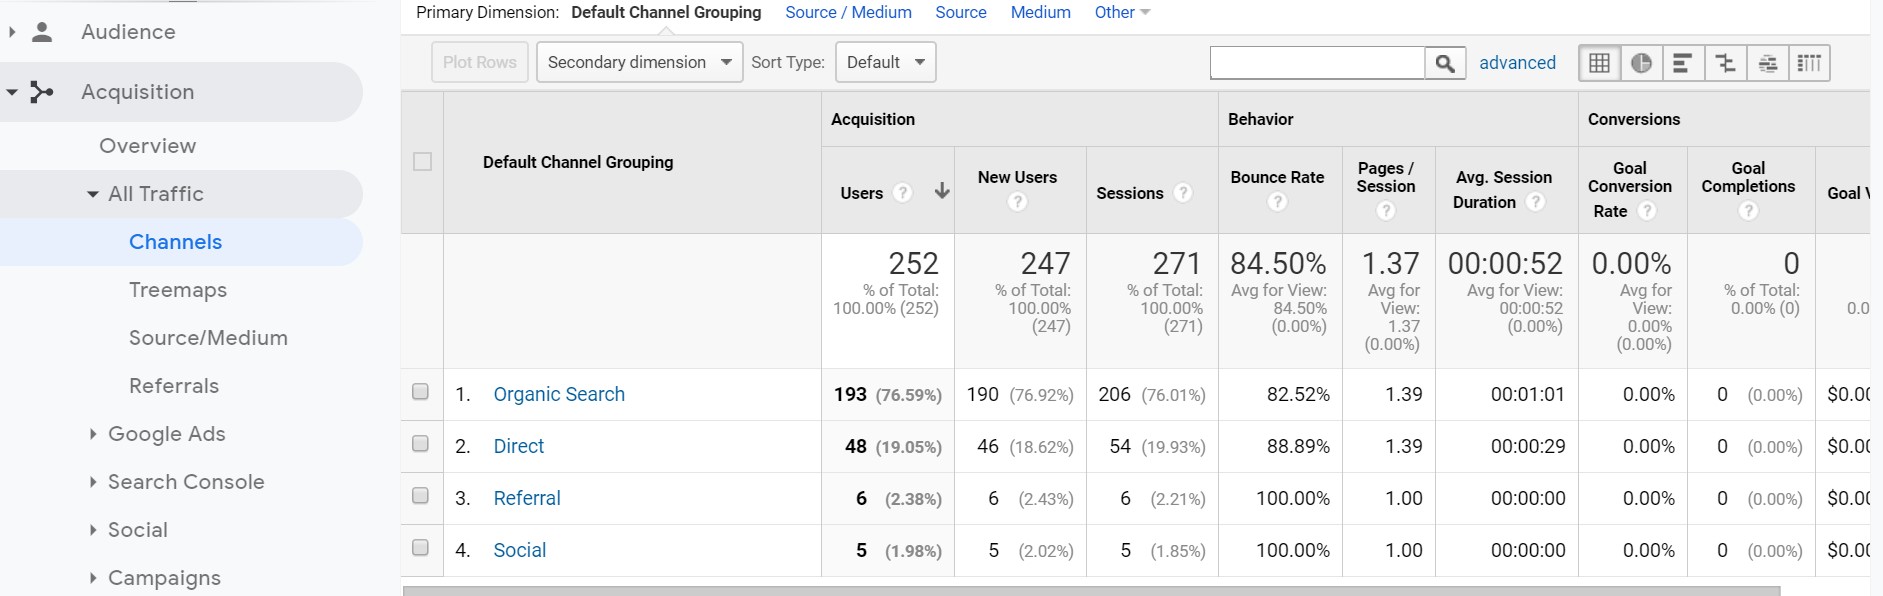 Acquisition Tab in Google Analytics to See Where and How Your Target Audience is Landing